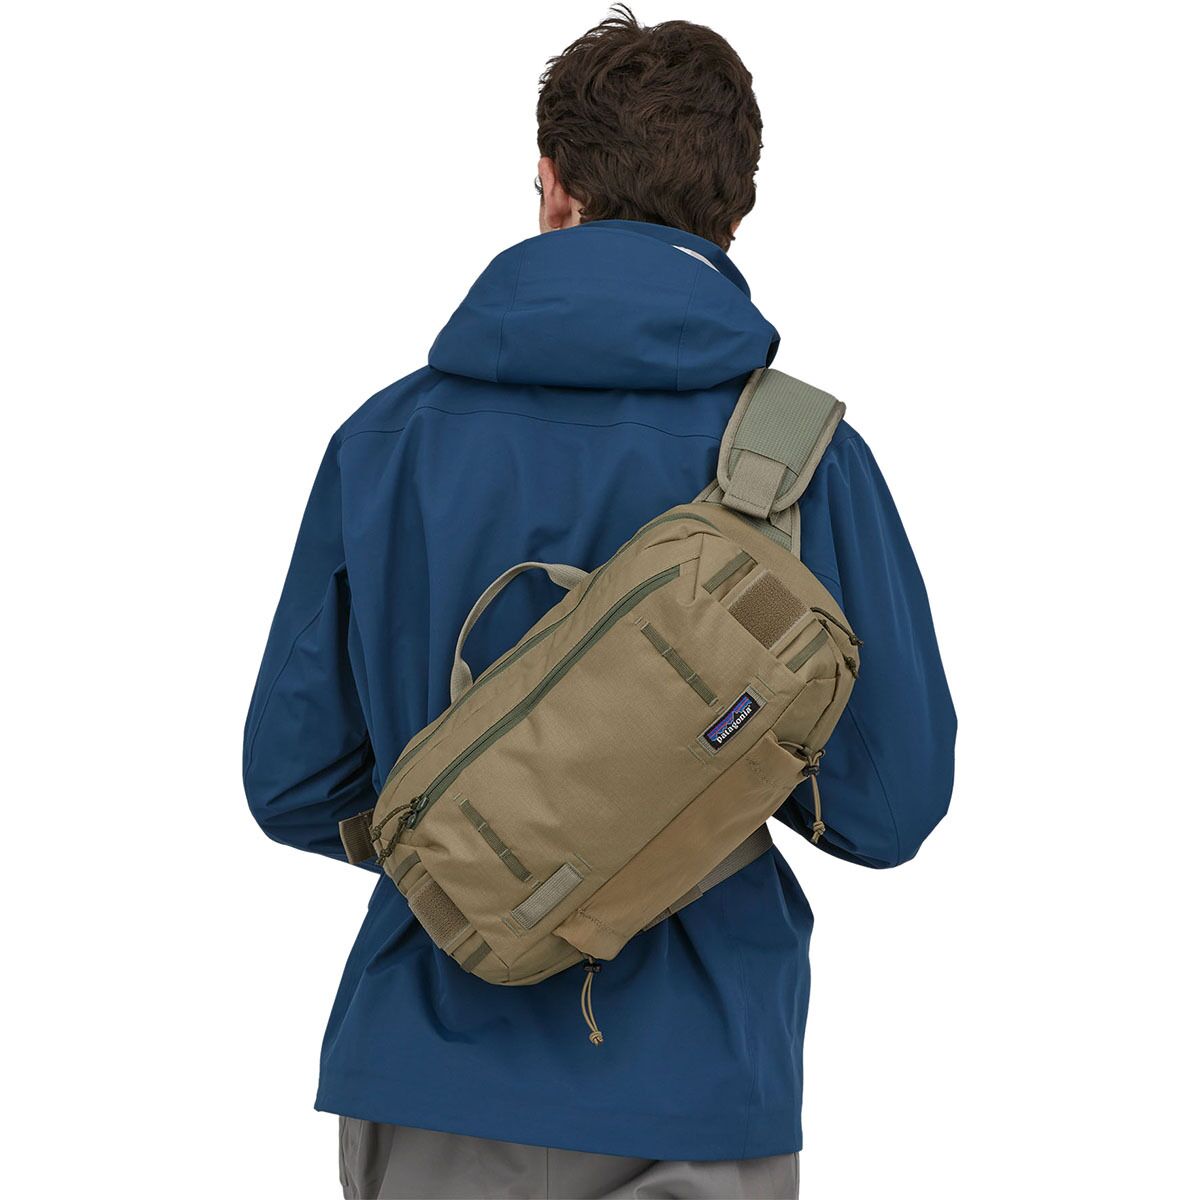 Patagonia Stealth 10L Sling Pack - Fishing